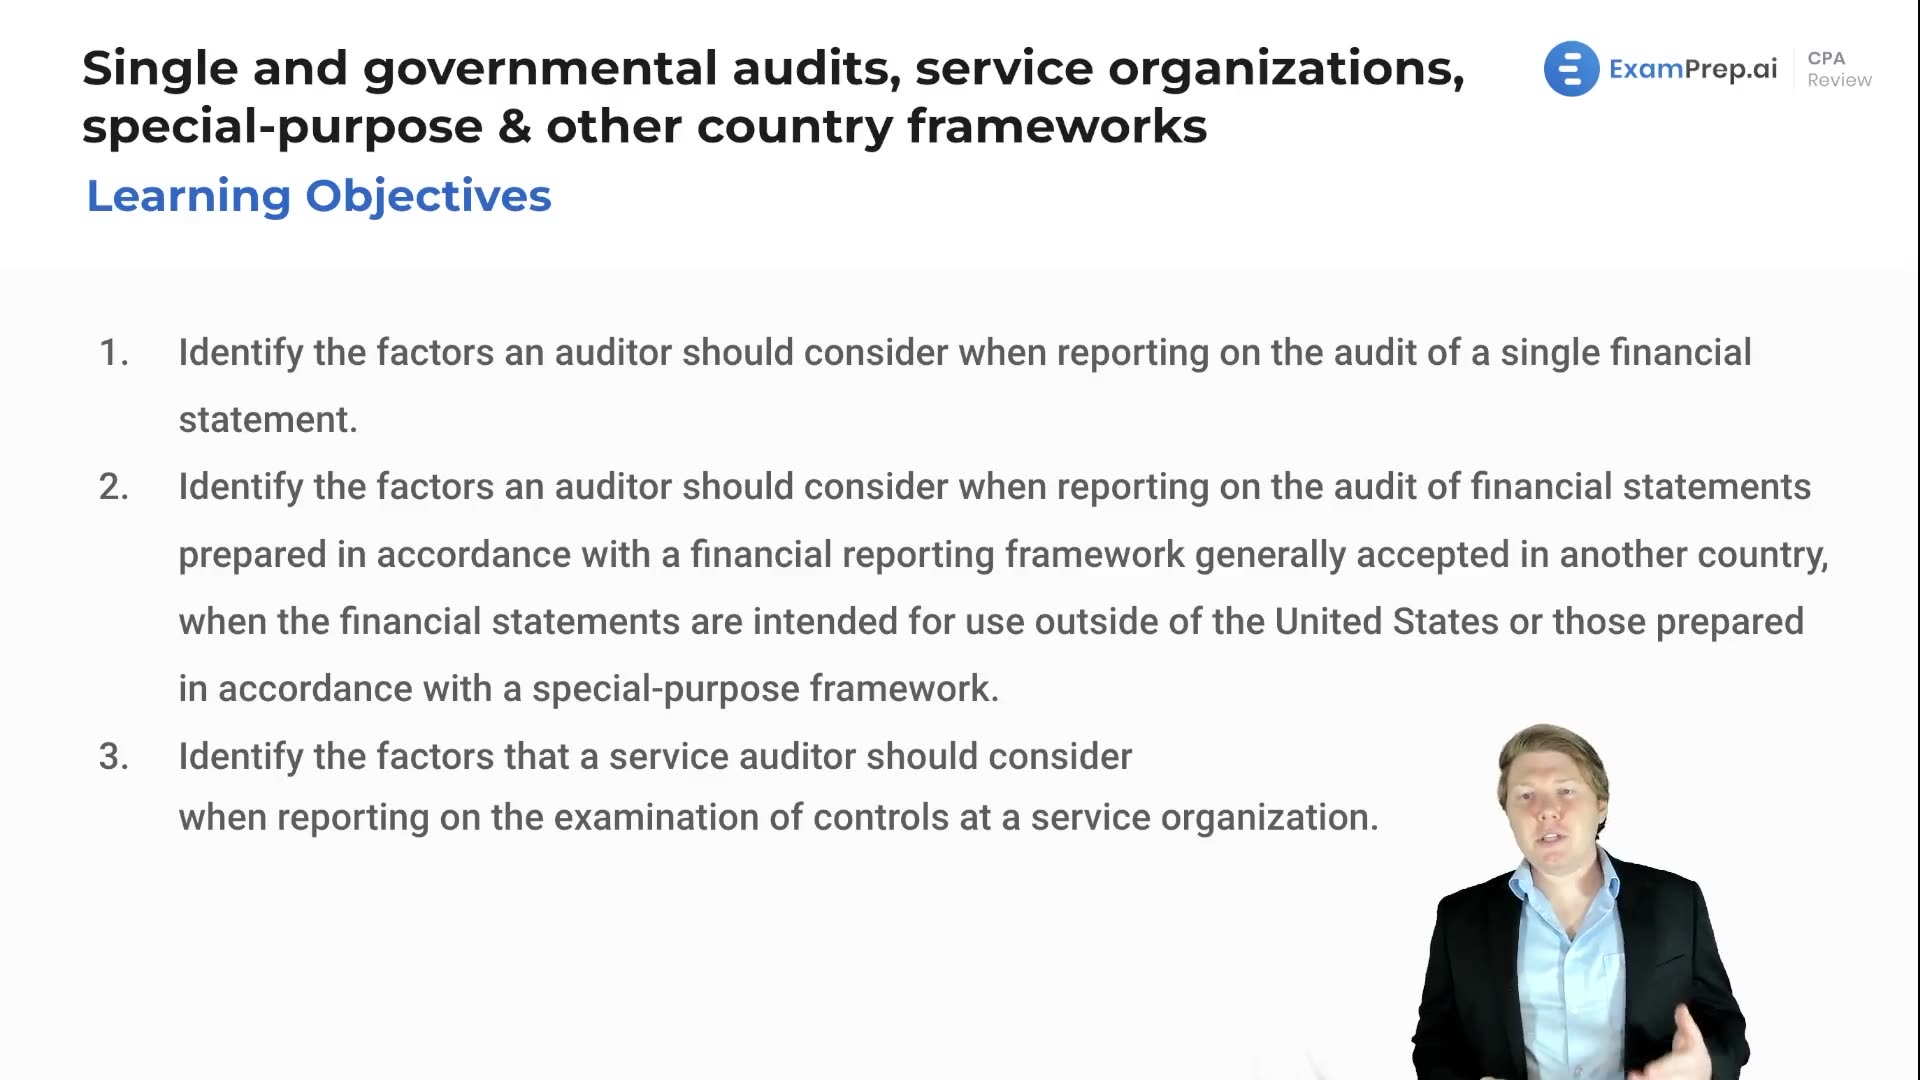 Single and Governmental Audits, Service Organizations, Special-purpose & Other Country Frameworks Objectives lesson thumbnail